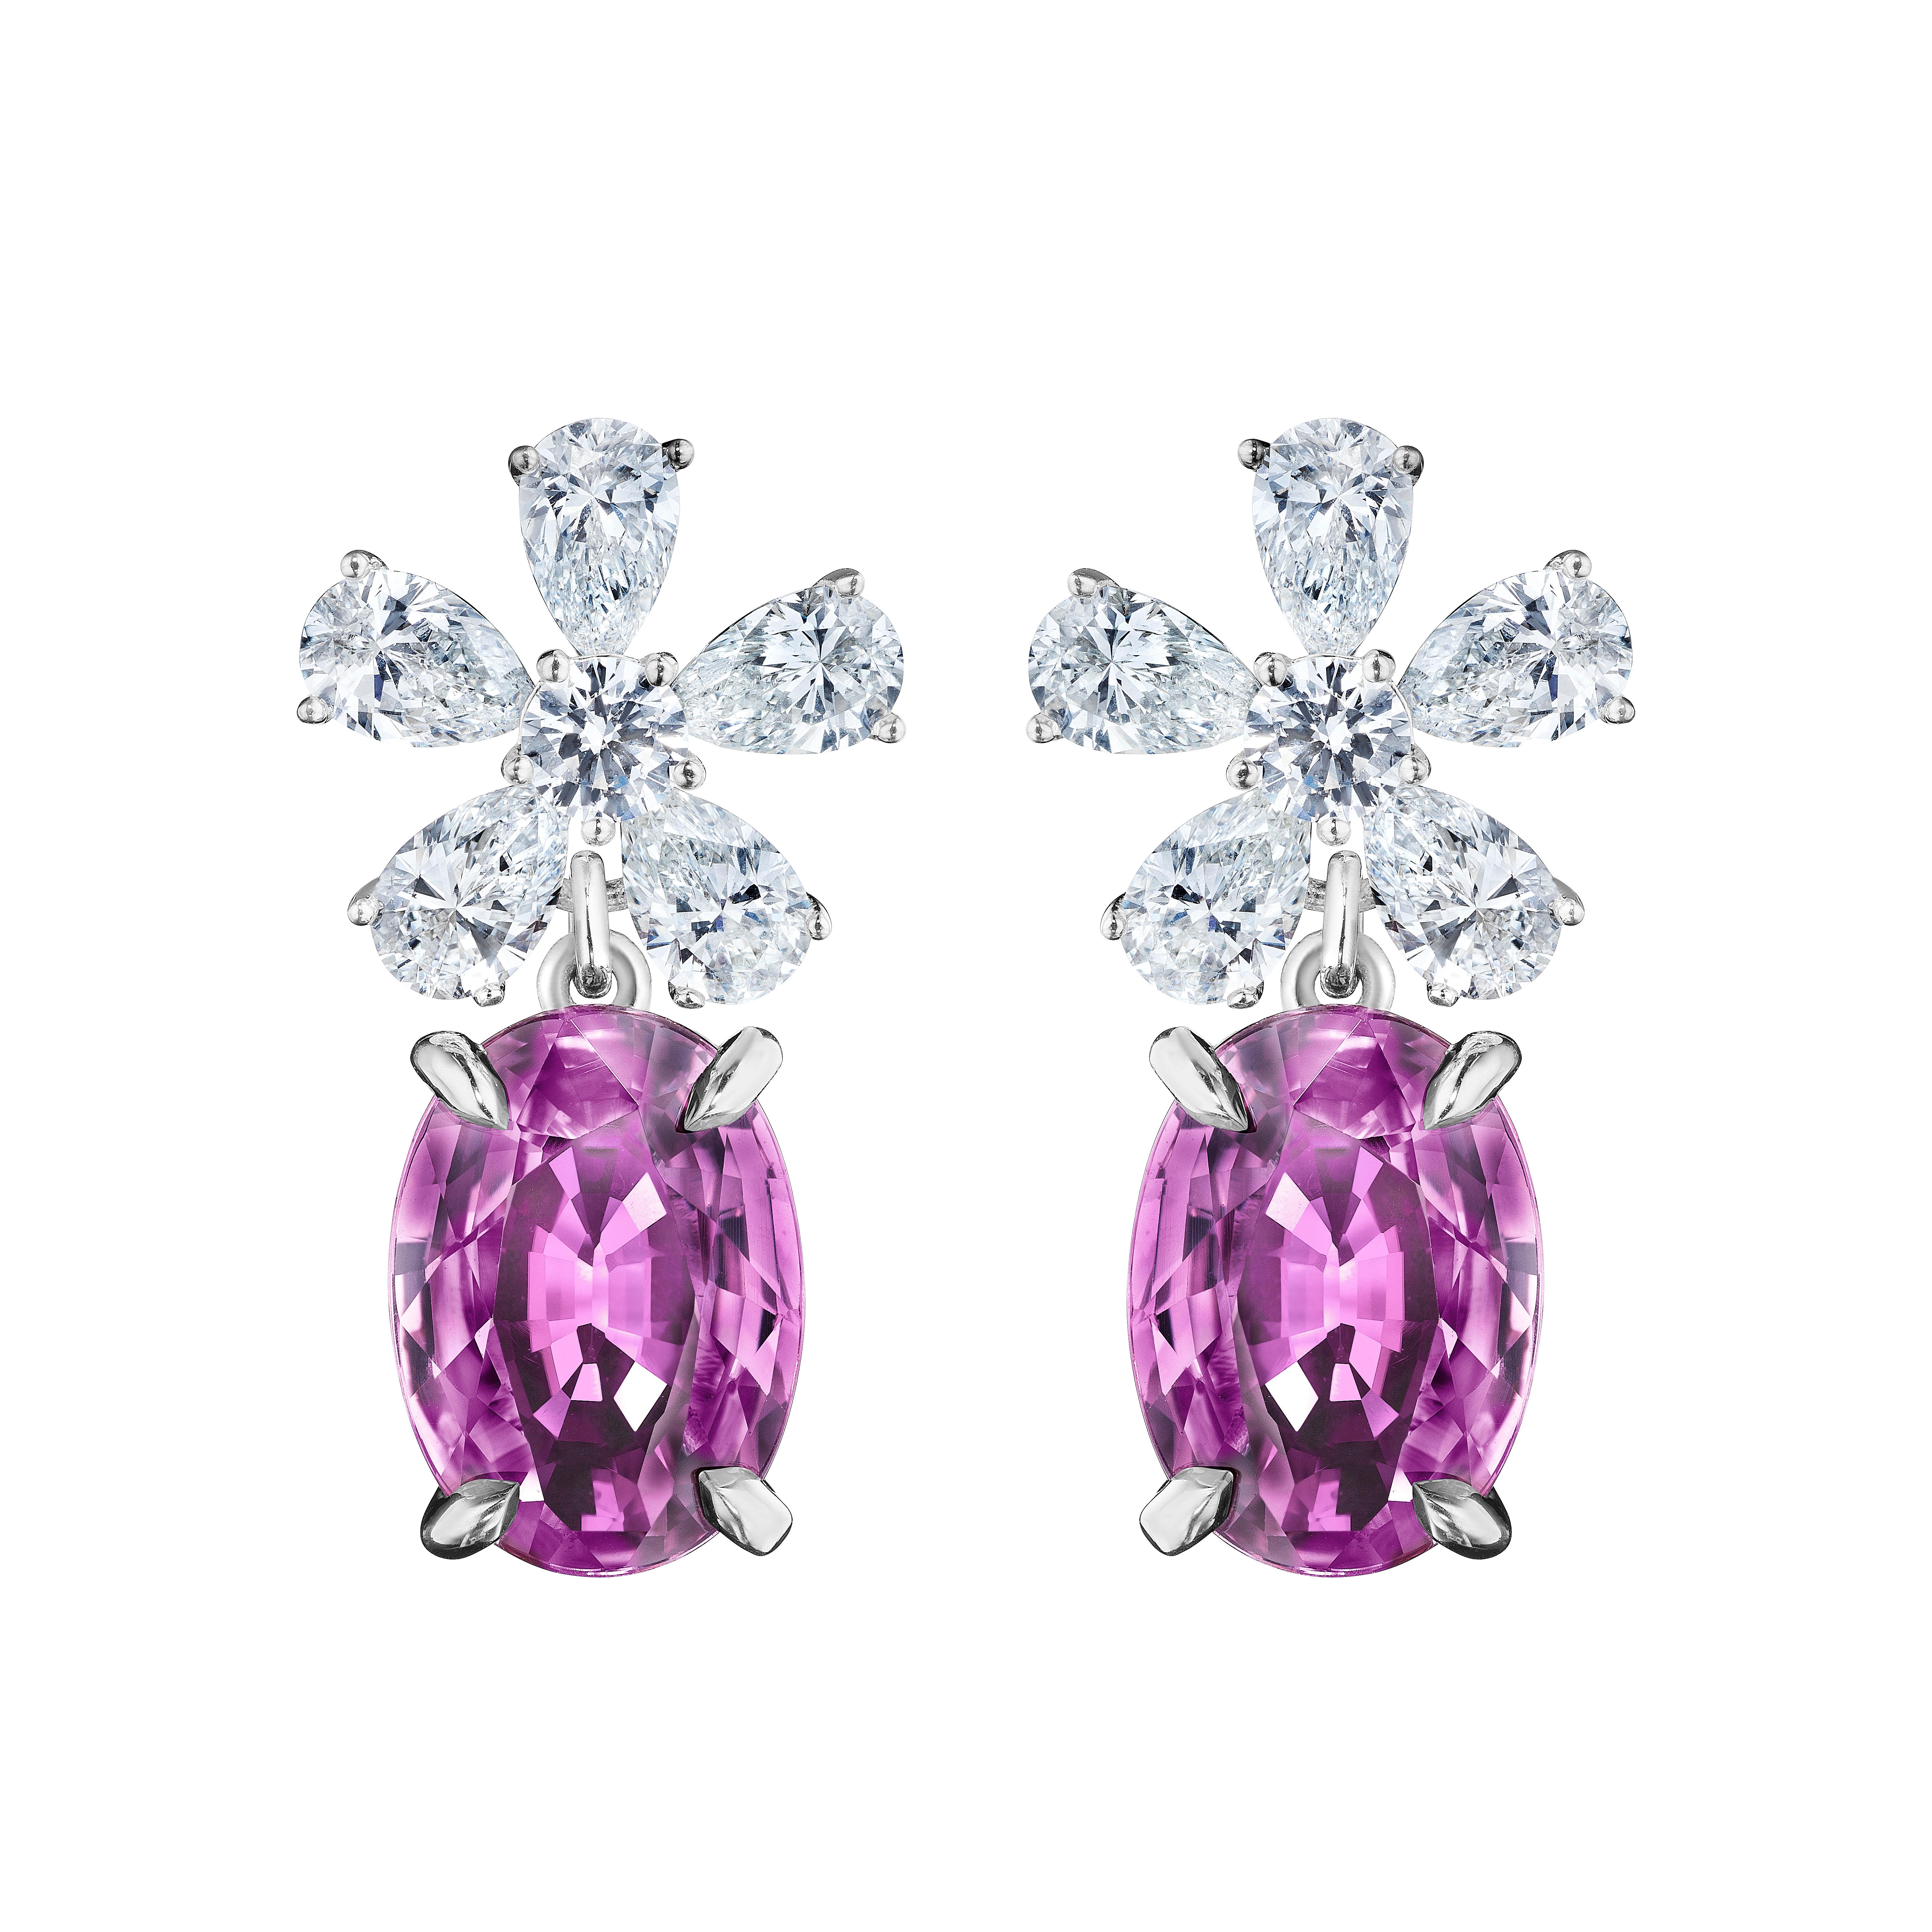 10.73ct Oval Cut Pink Sapphire & Diamond Flower Earrings in 18KT White Gold For Sale